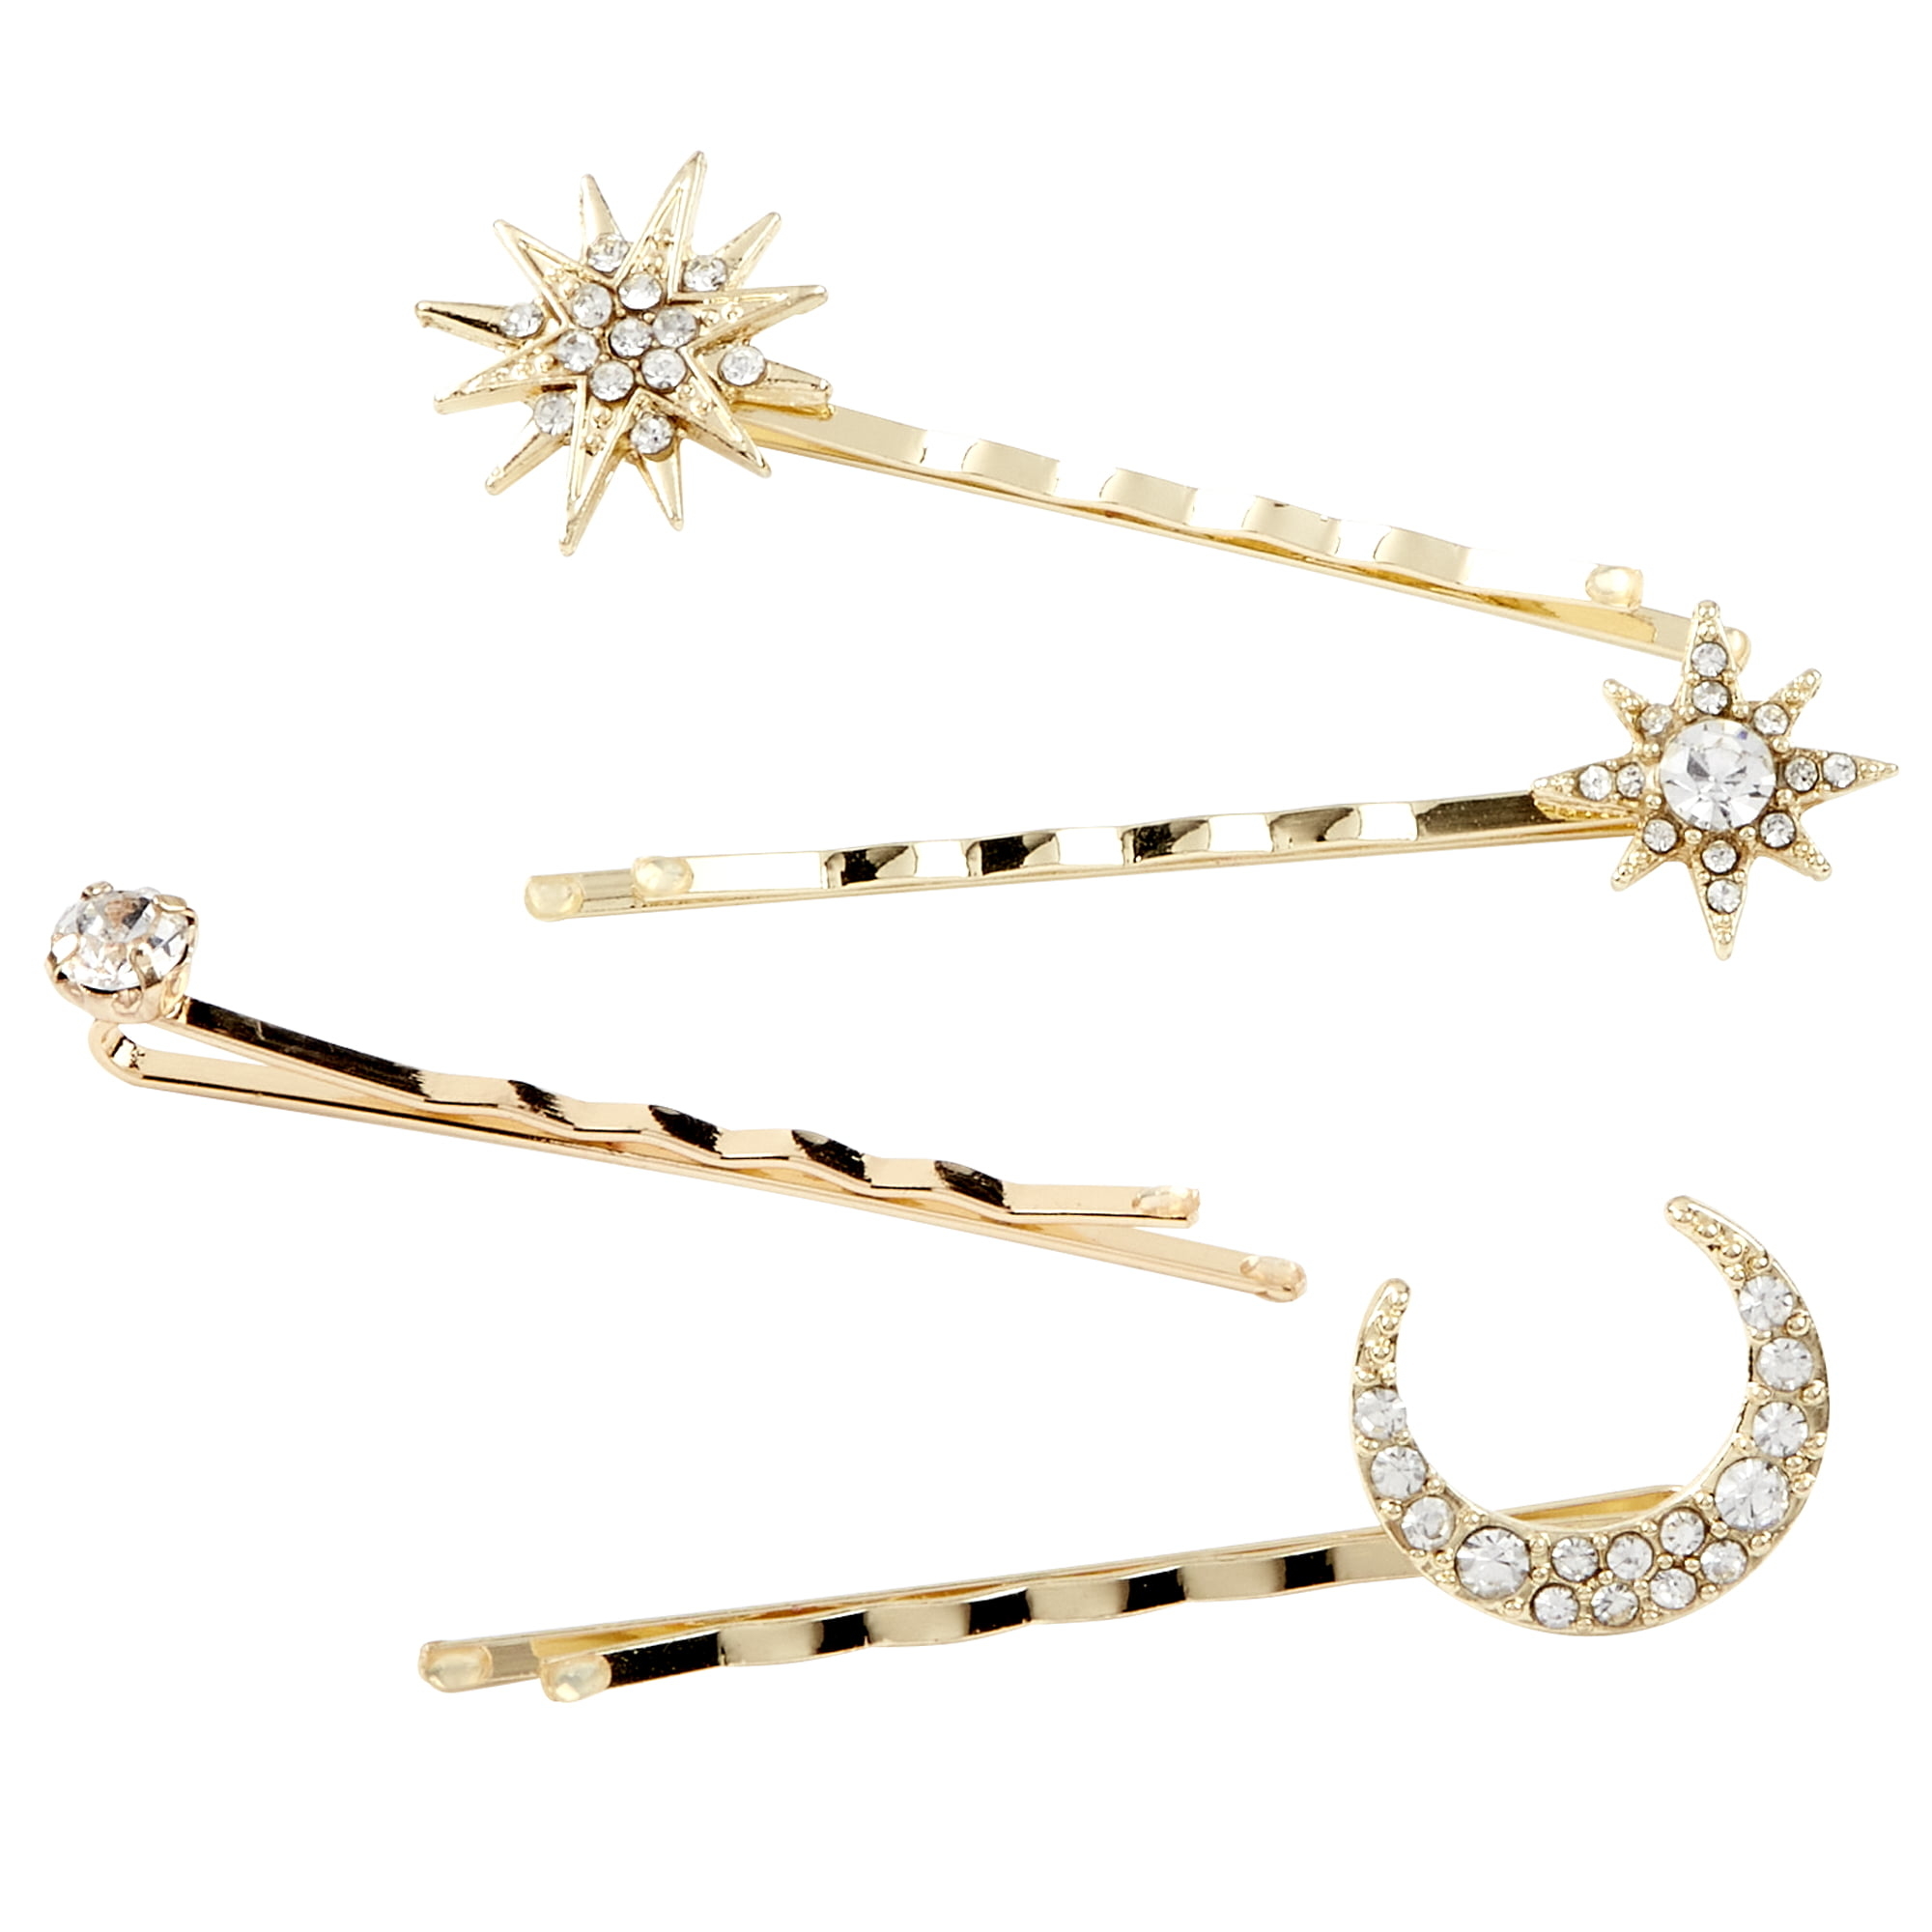 A pack of golden hairpins with celestial designs